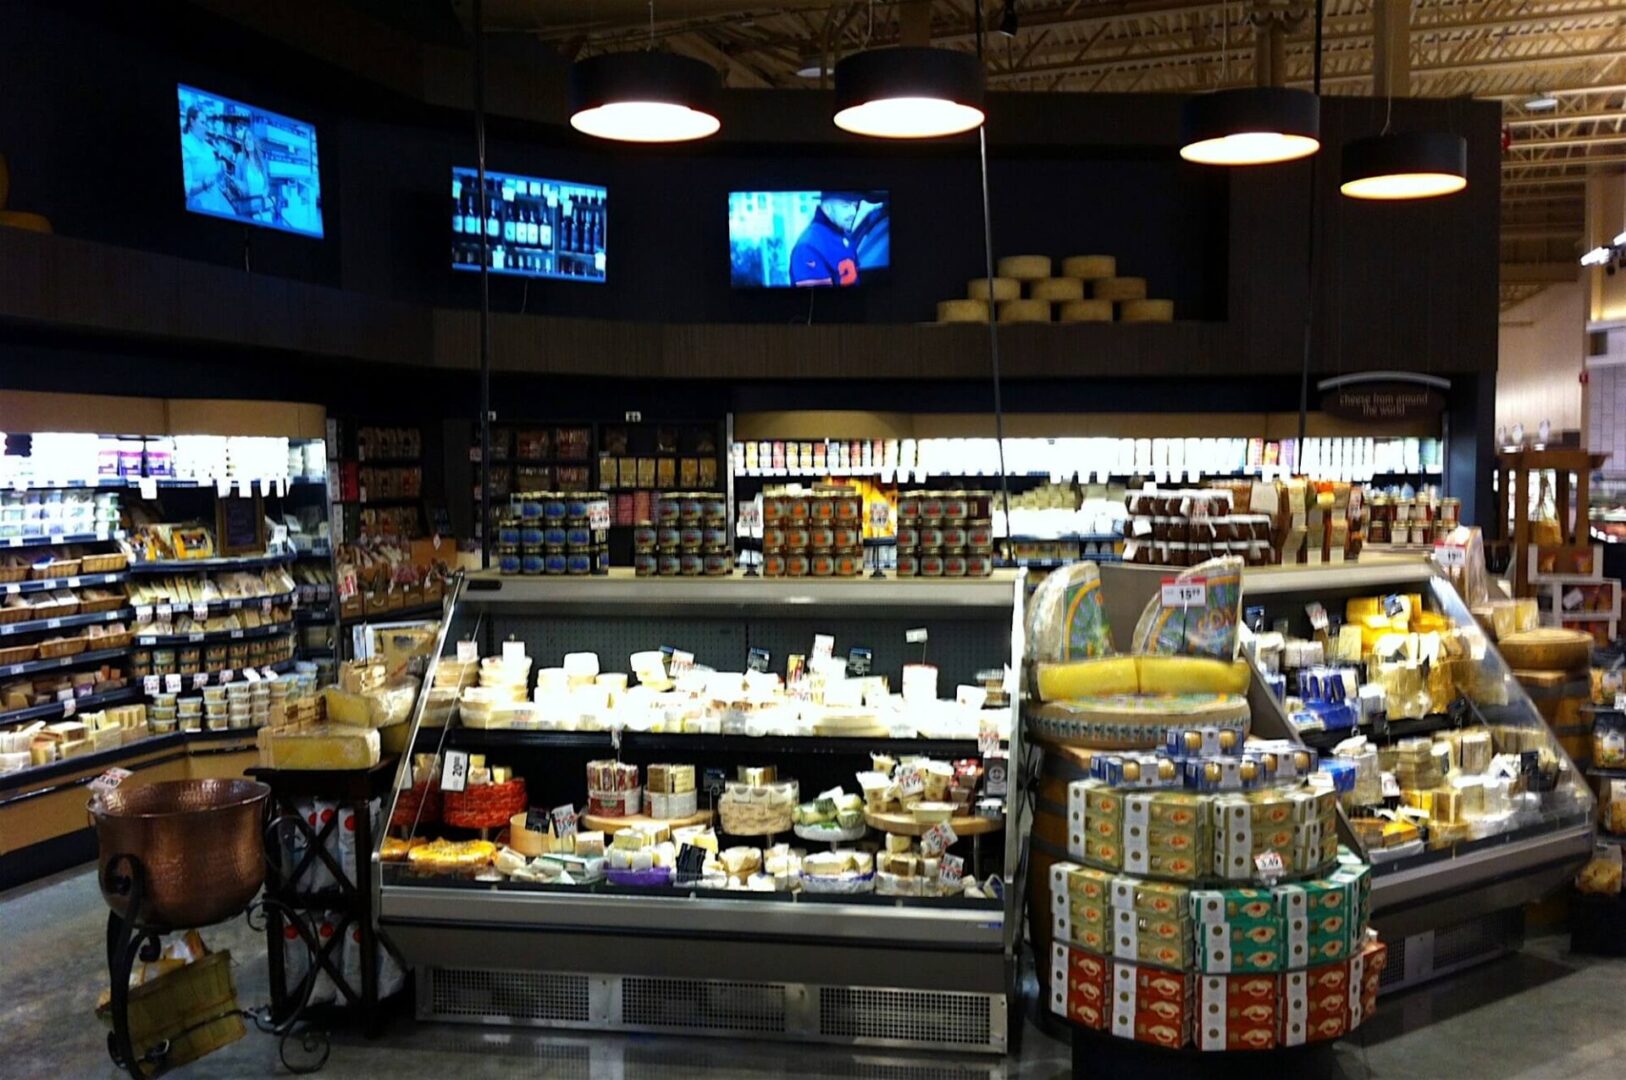 A store with many different types of cheese.